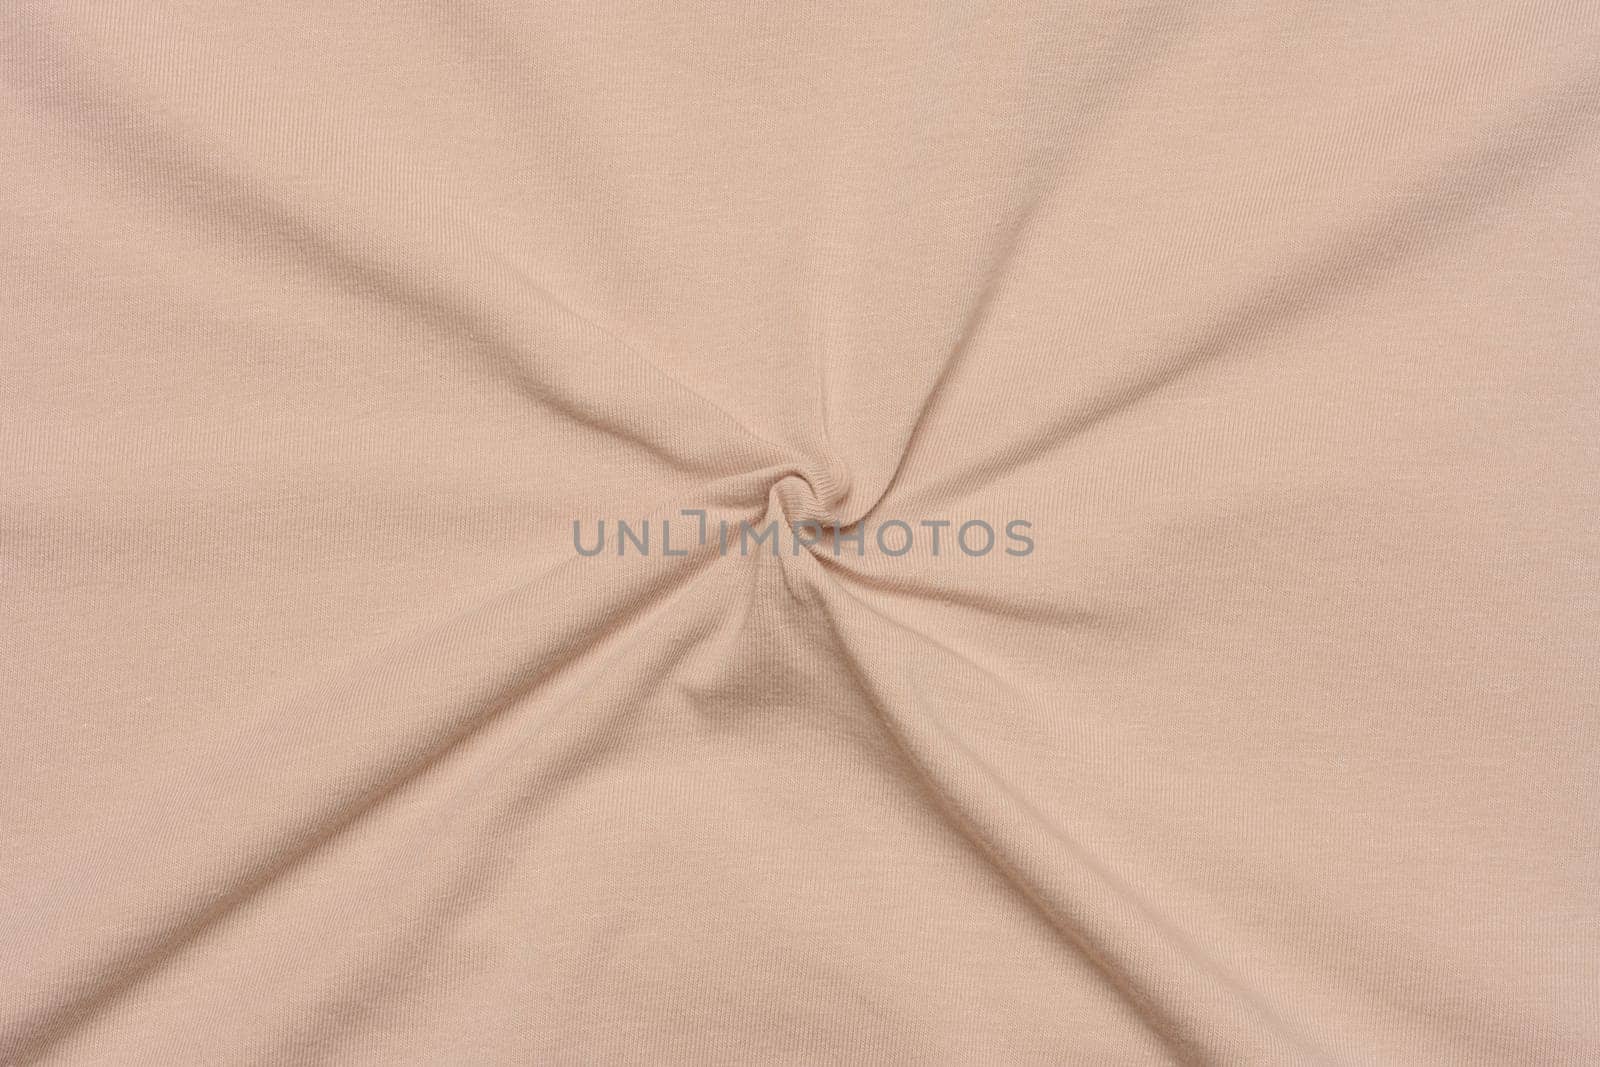 Beige knitted fabric for tailoring, full frame